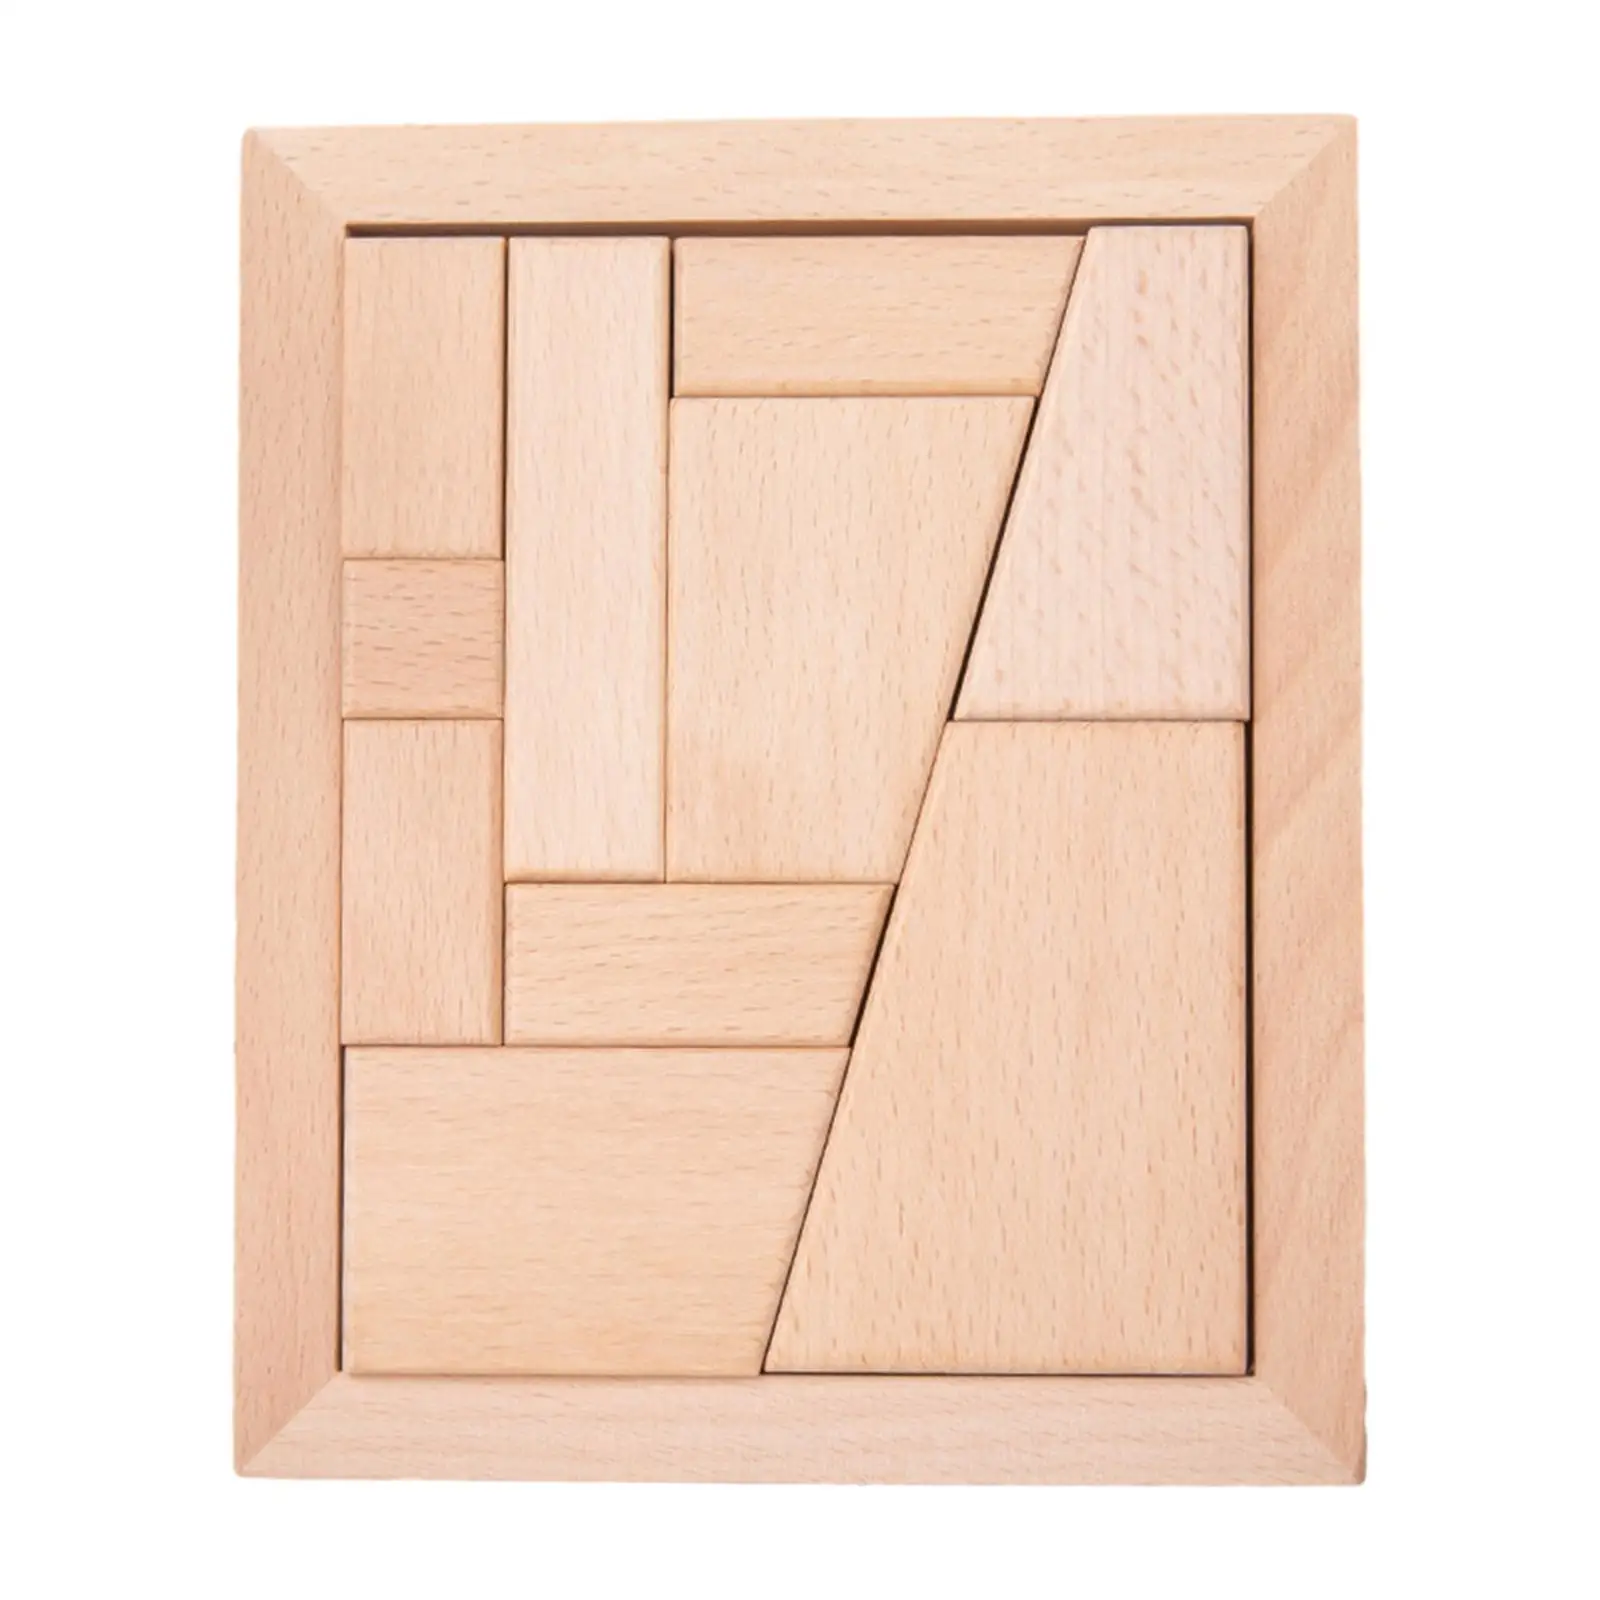 Tangram Wooden Puzzle Children and Adults Challenging Puzzles Teaching Aids Brain Teasers Holiday Gifts Family Portable Puzzles